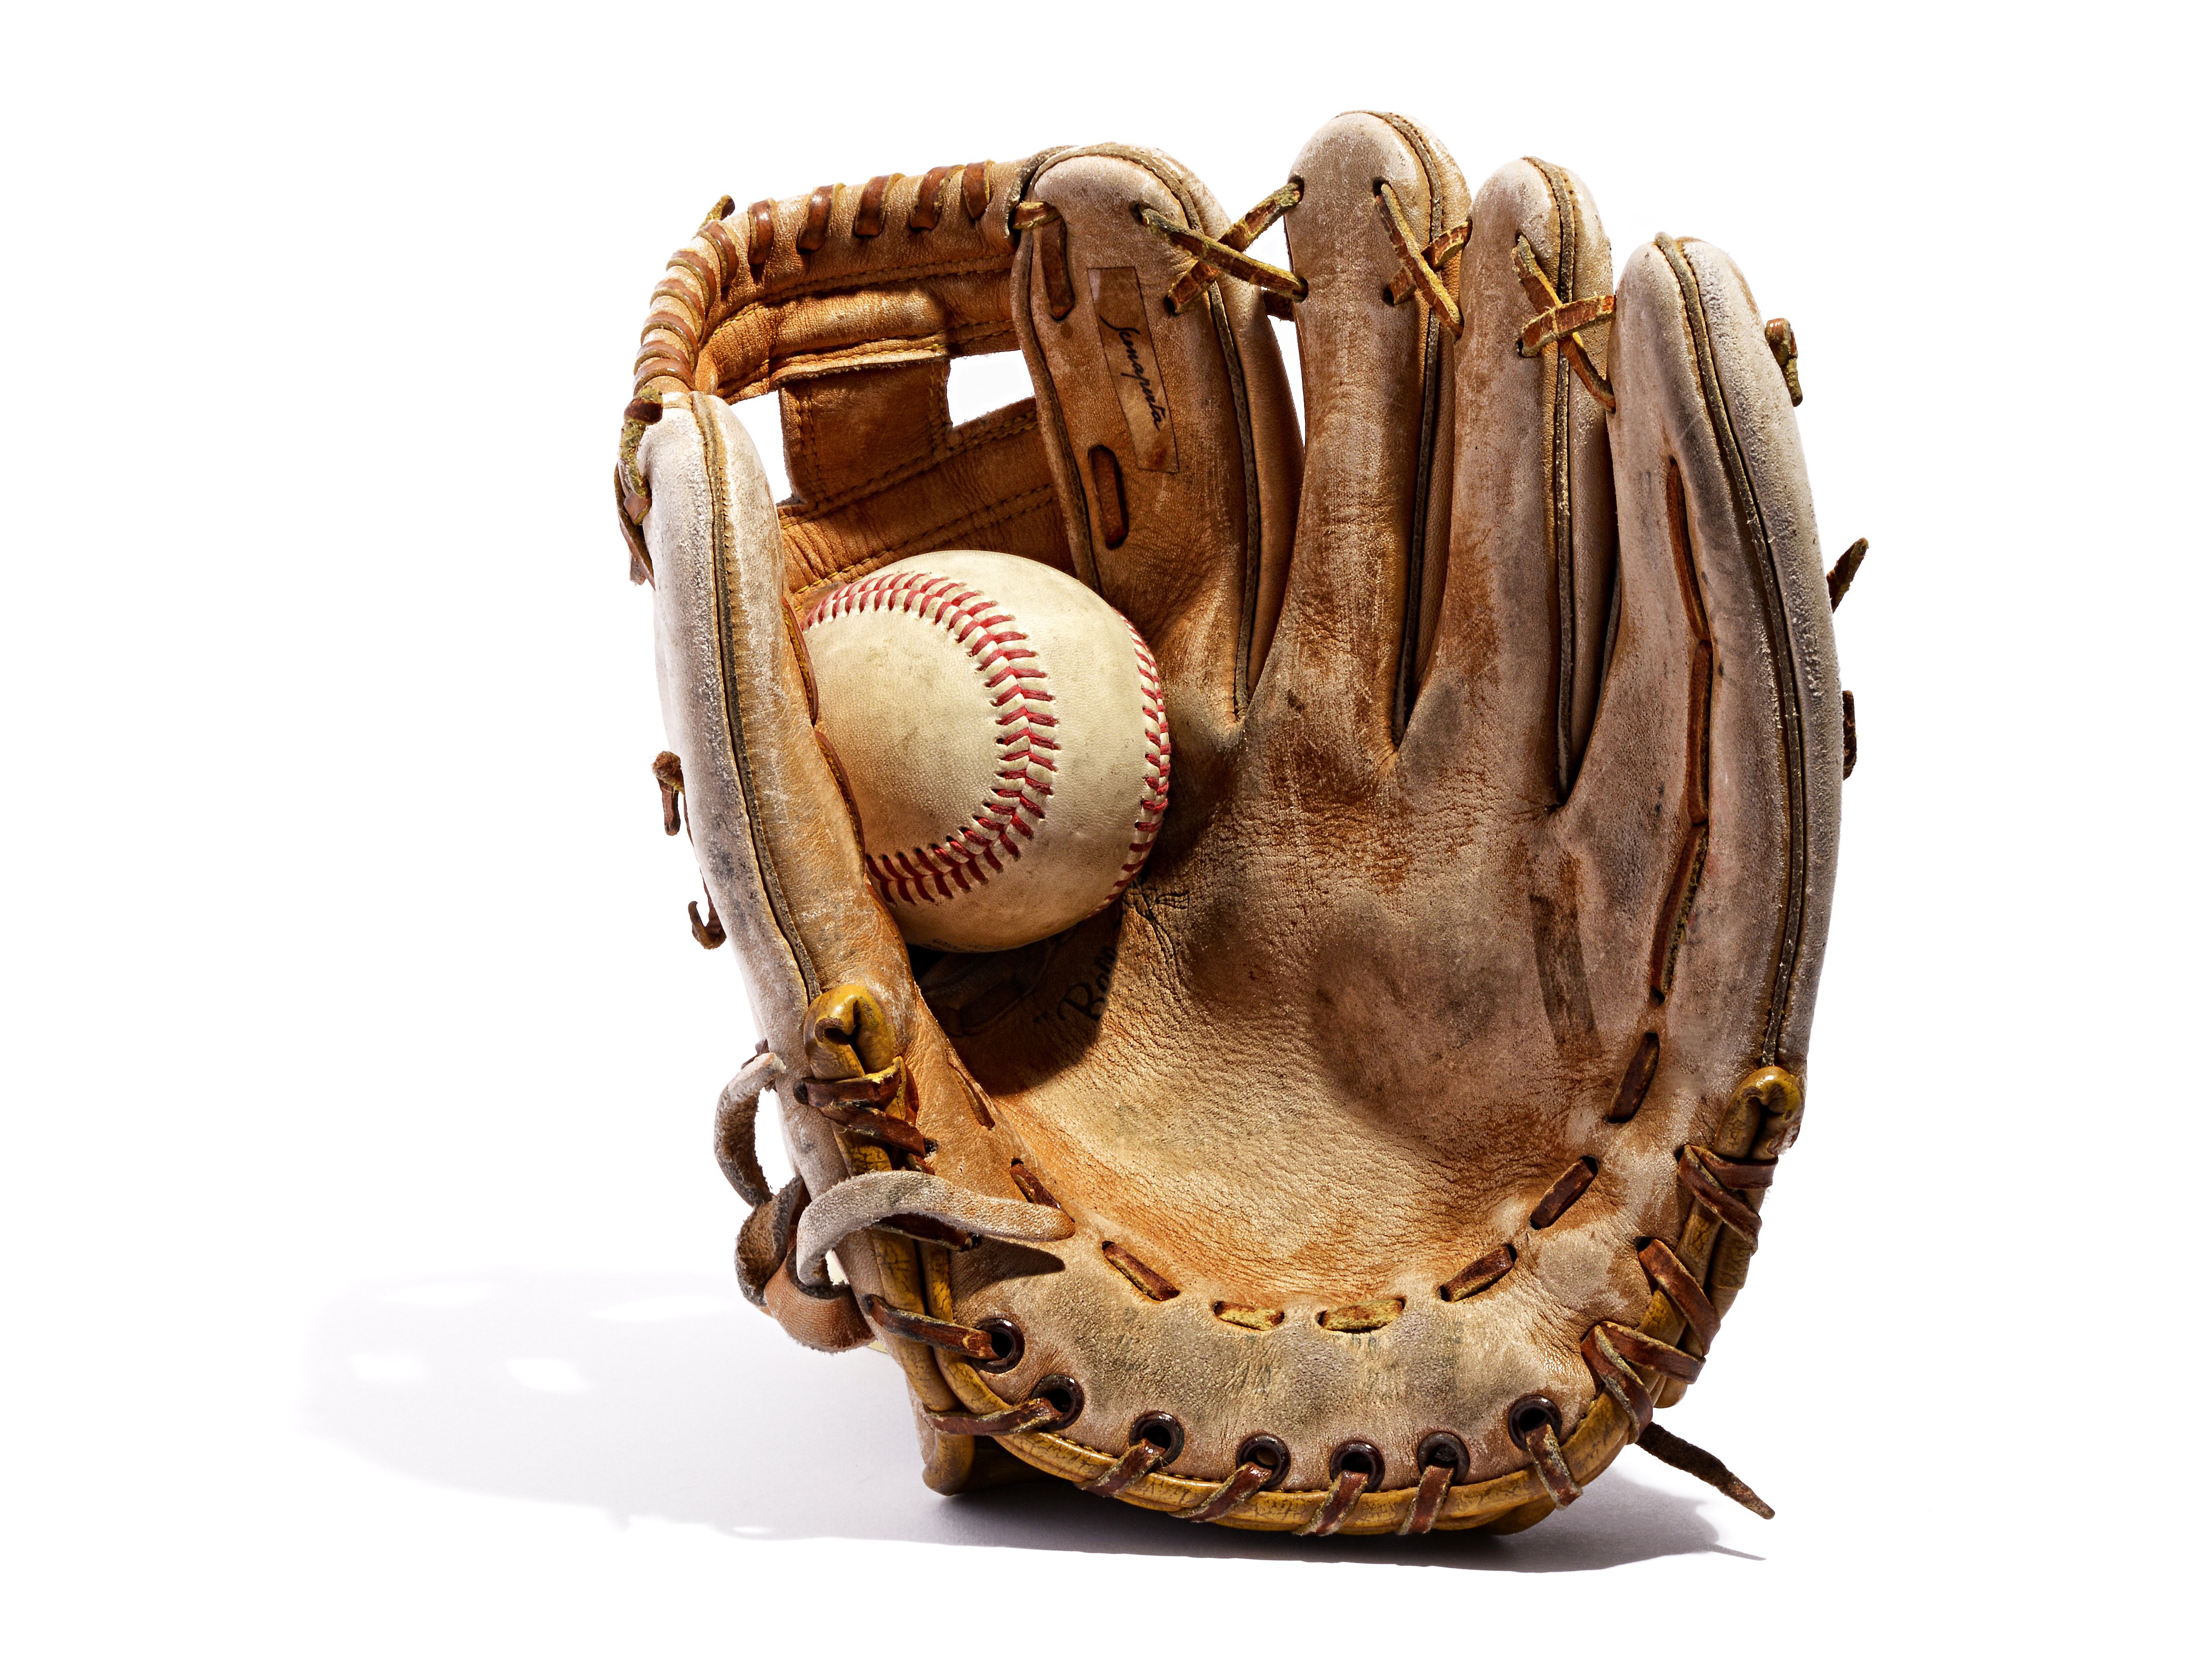 How To Break In A Baseball Glove - The Right Way!